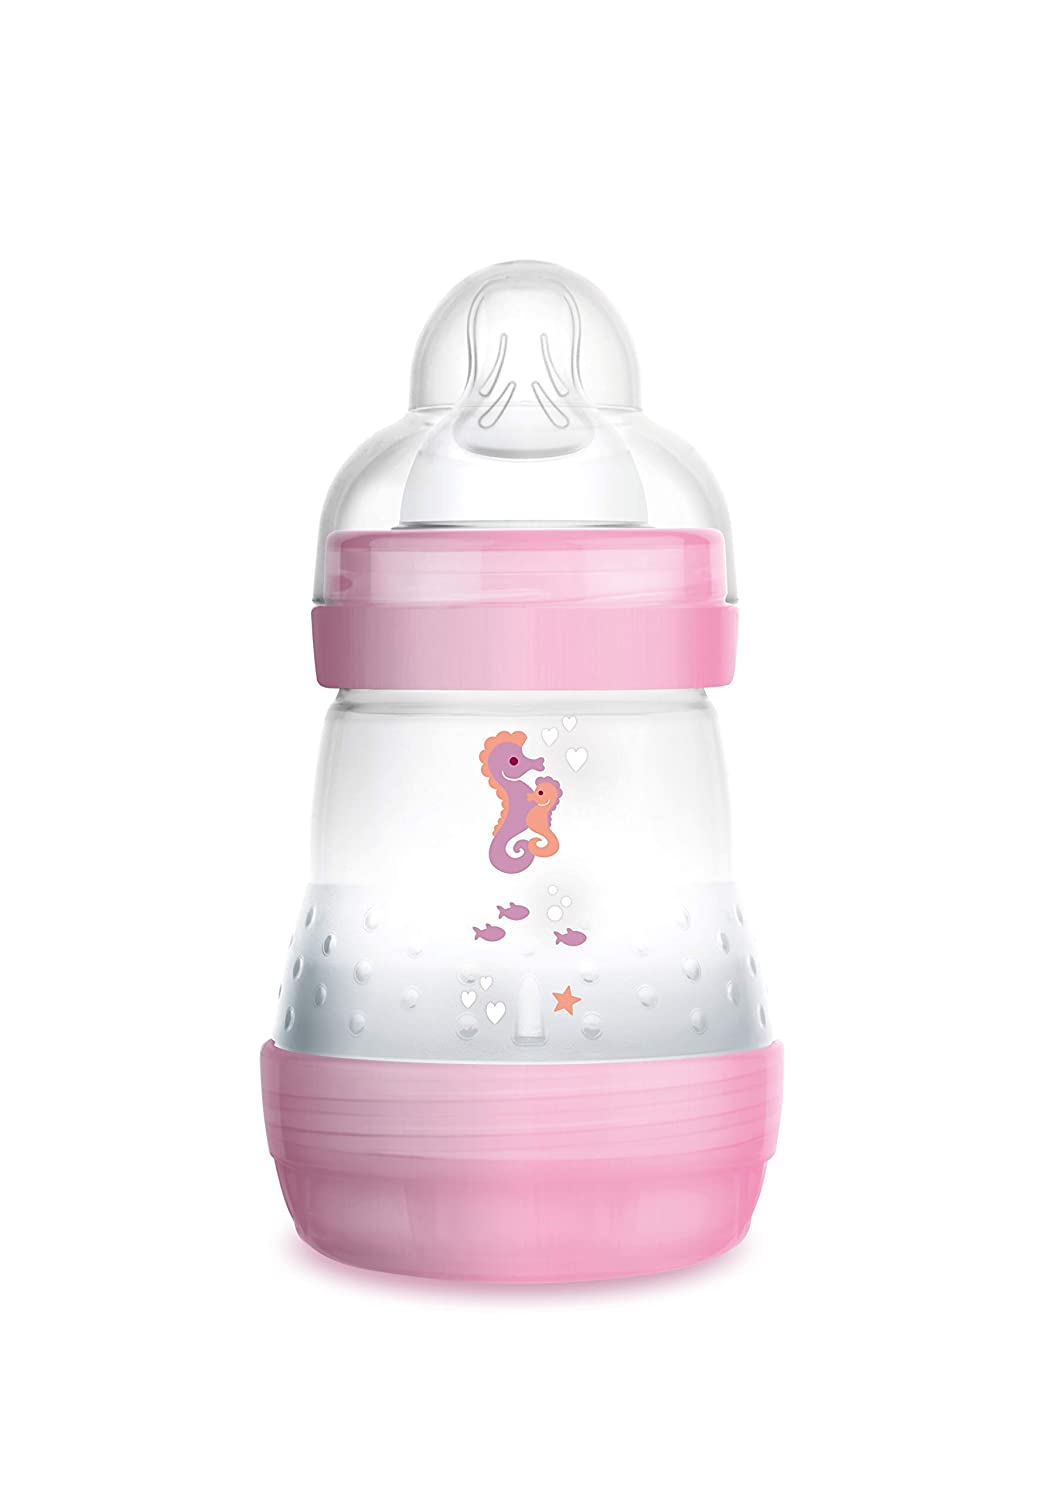 MAM Easy Start anti-colic baby bottle (160 ml), milk bottle with innovative base valve to prevent colic, baby’s drinking bottle with size 1 teat, from birth, seahorse, pink